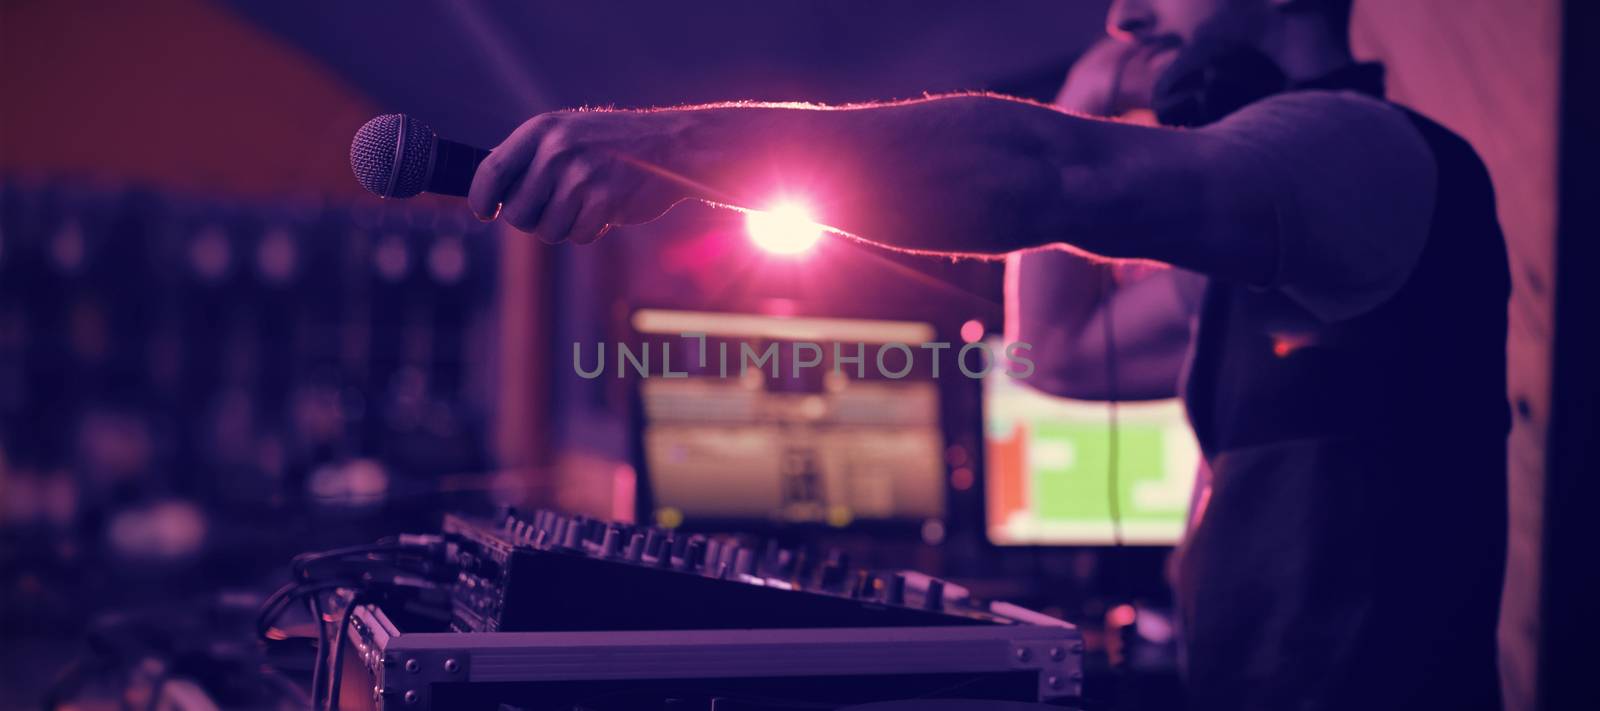 Male dj holding microphone towards the crowd while playing music in bar